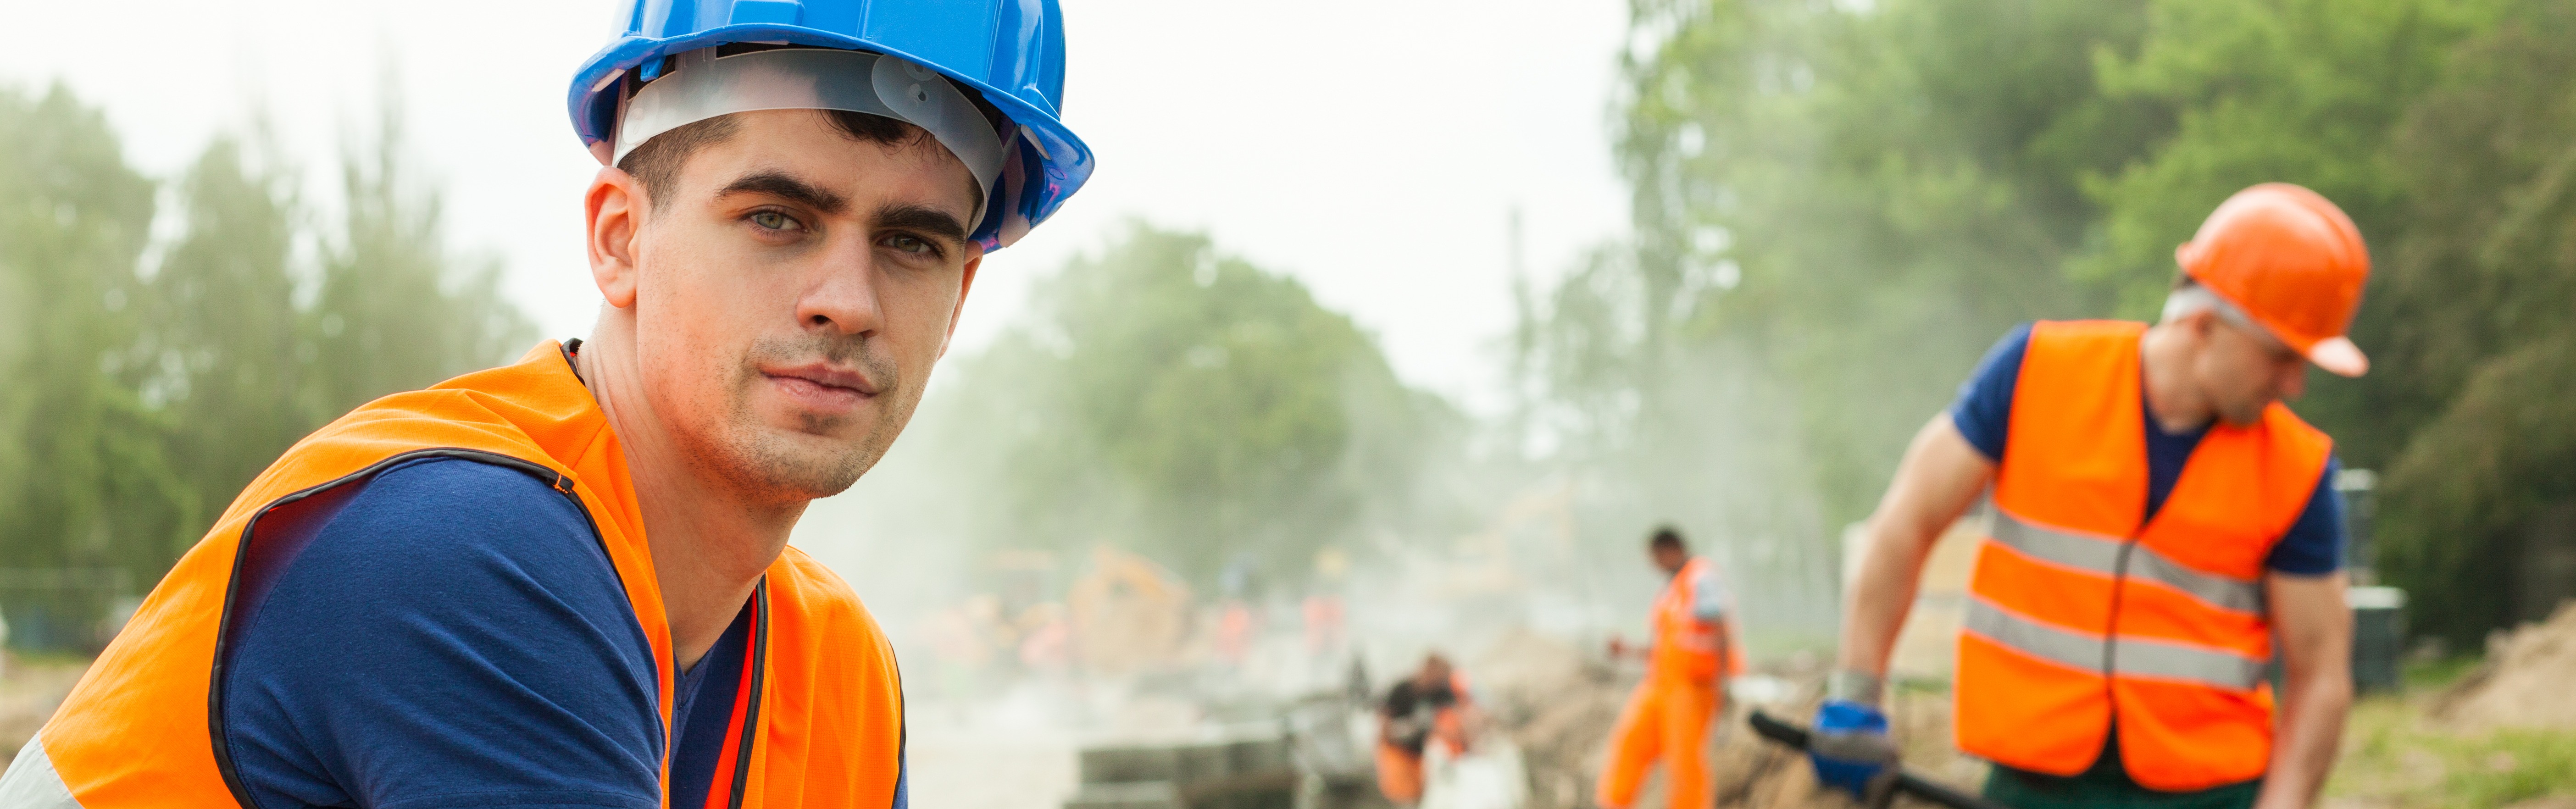 Mental Health in Construction